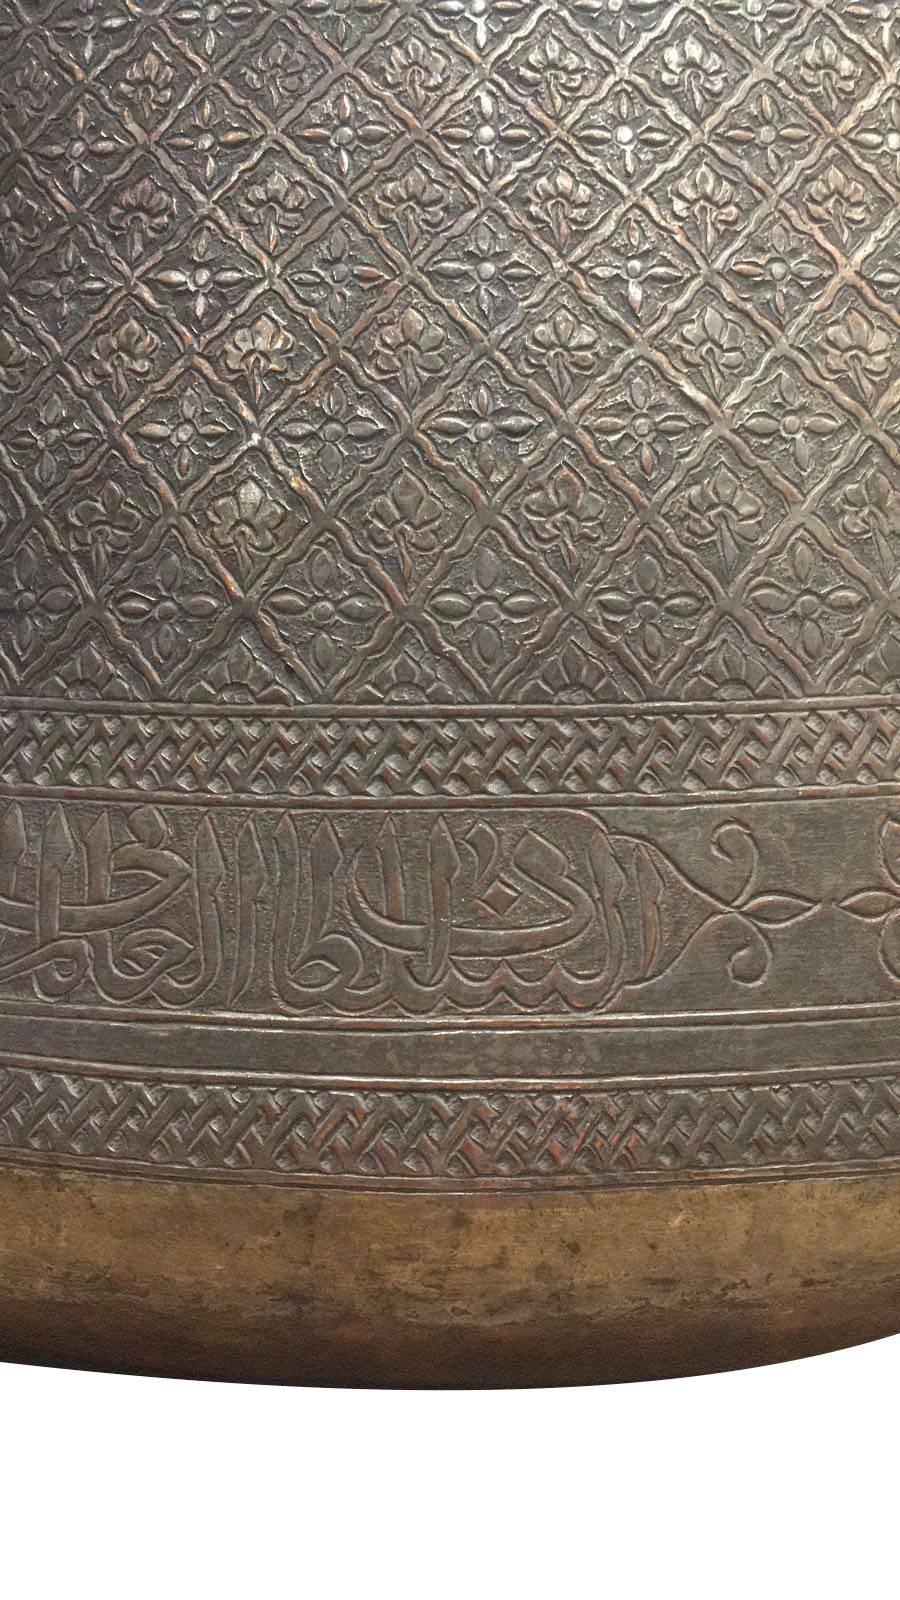 18th-19th century Mamluk tinned-copper vessel From Egypt. Decorated with a repeat diaper between two bands of script.

Measures: H 26.5 cm
W 31.5 cm.